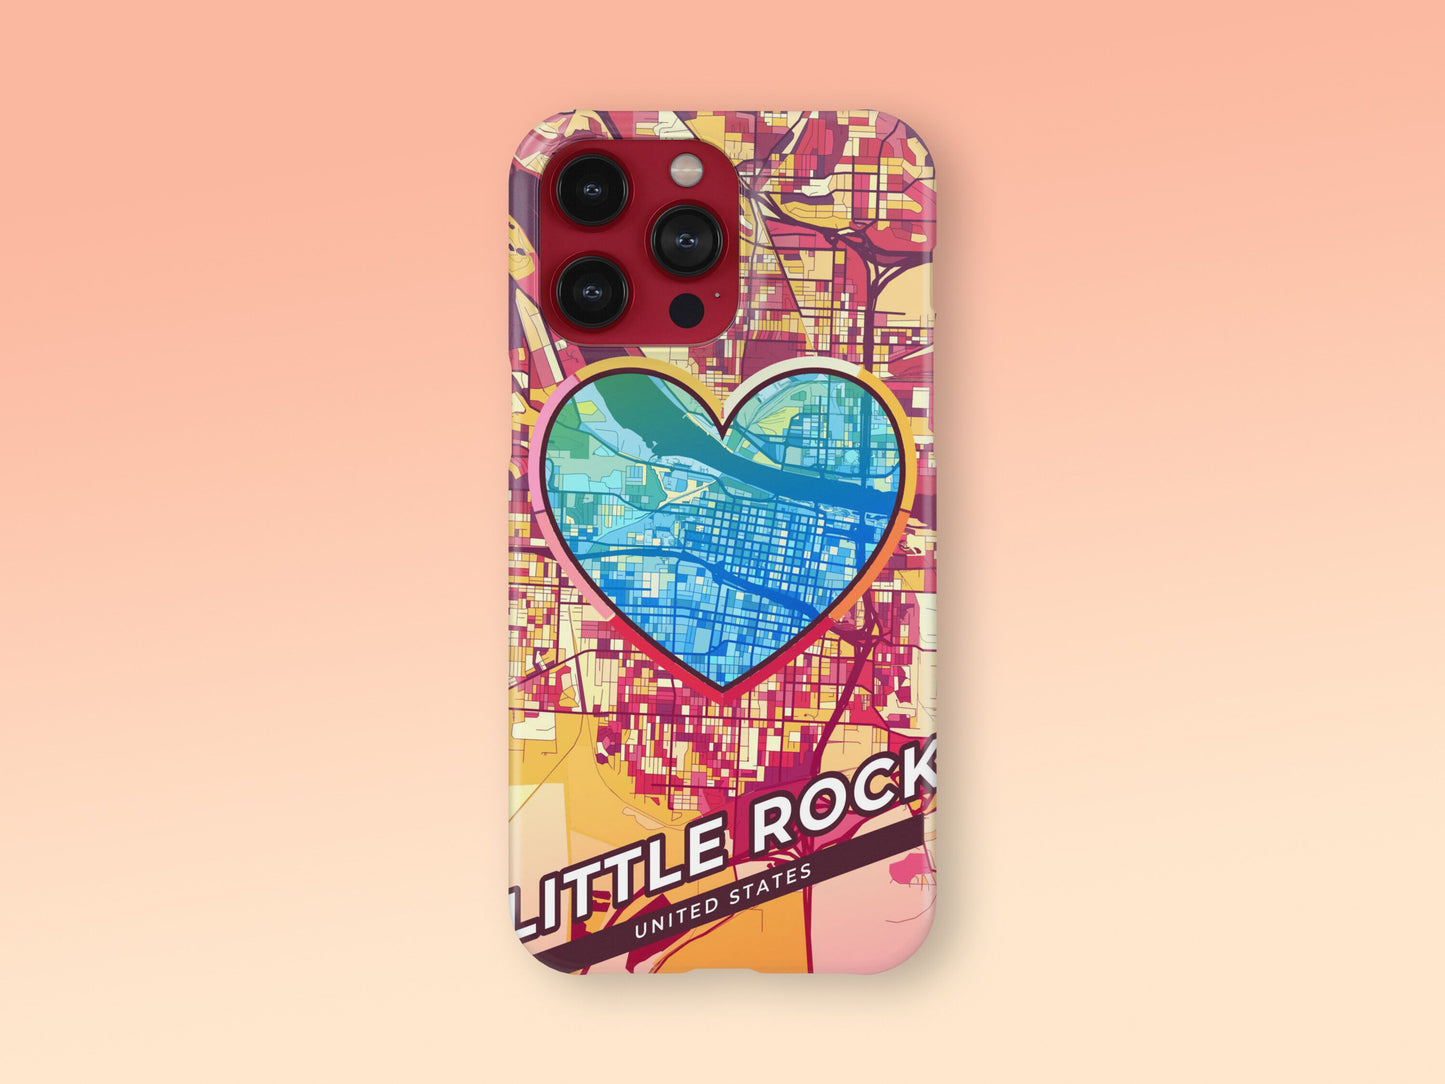 Little Rock Arkansas slim phone case with colorful icon. Birthday, wedding or housewarming gift. Couple match cases. 2